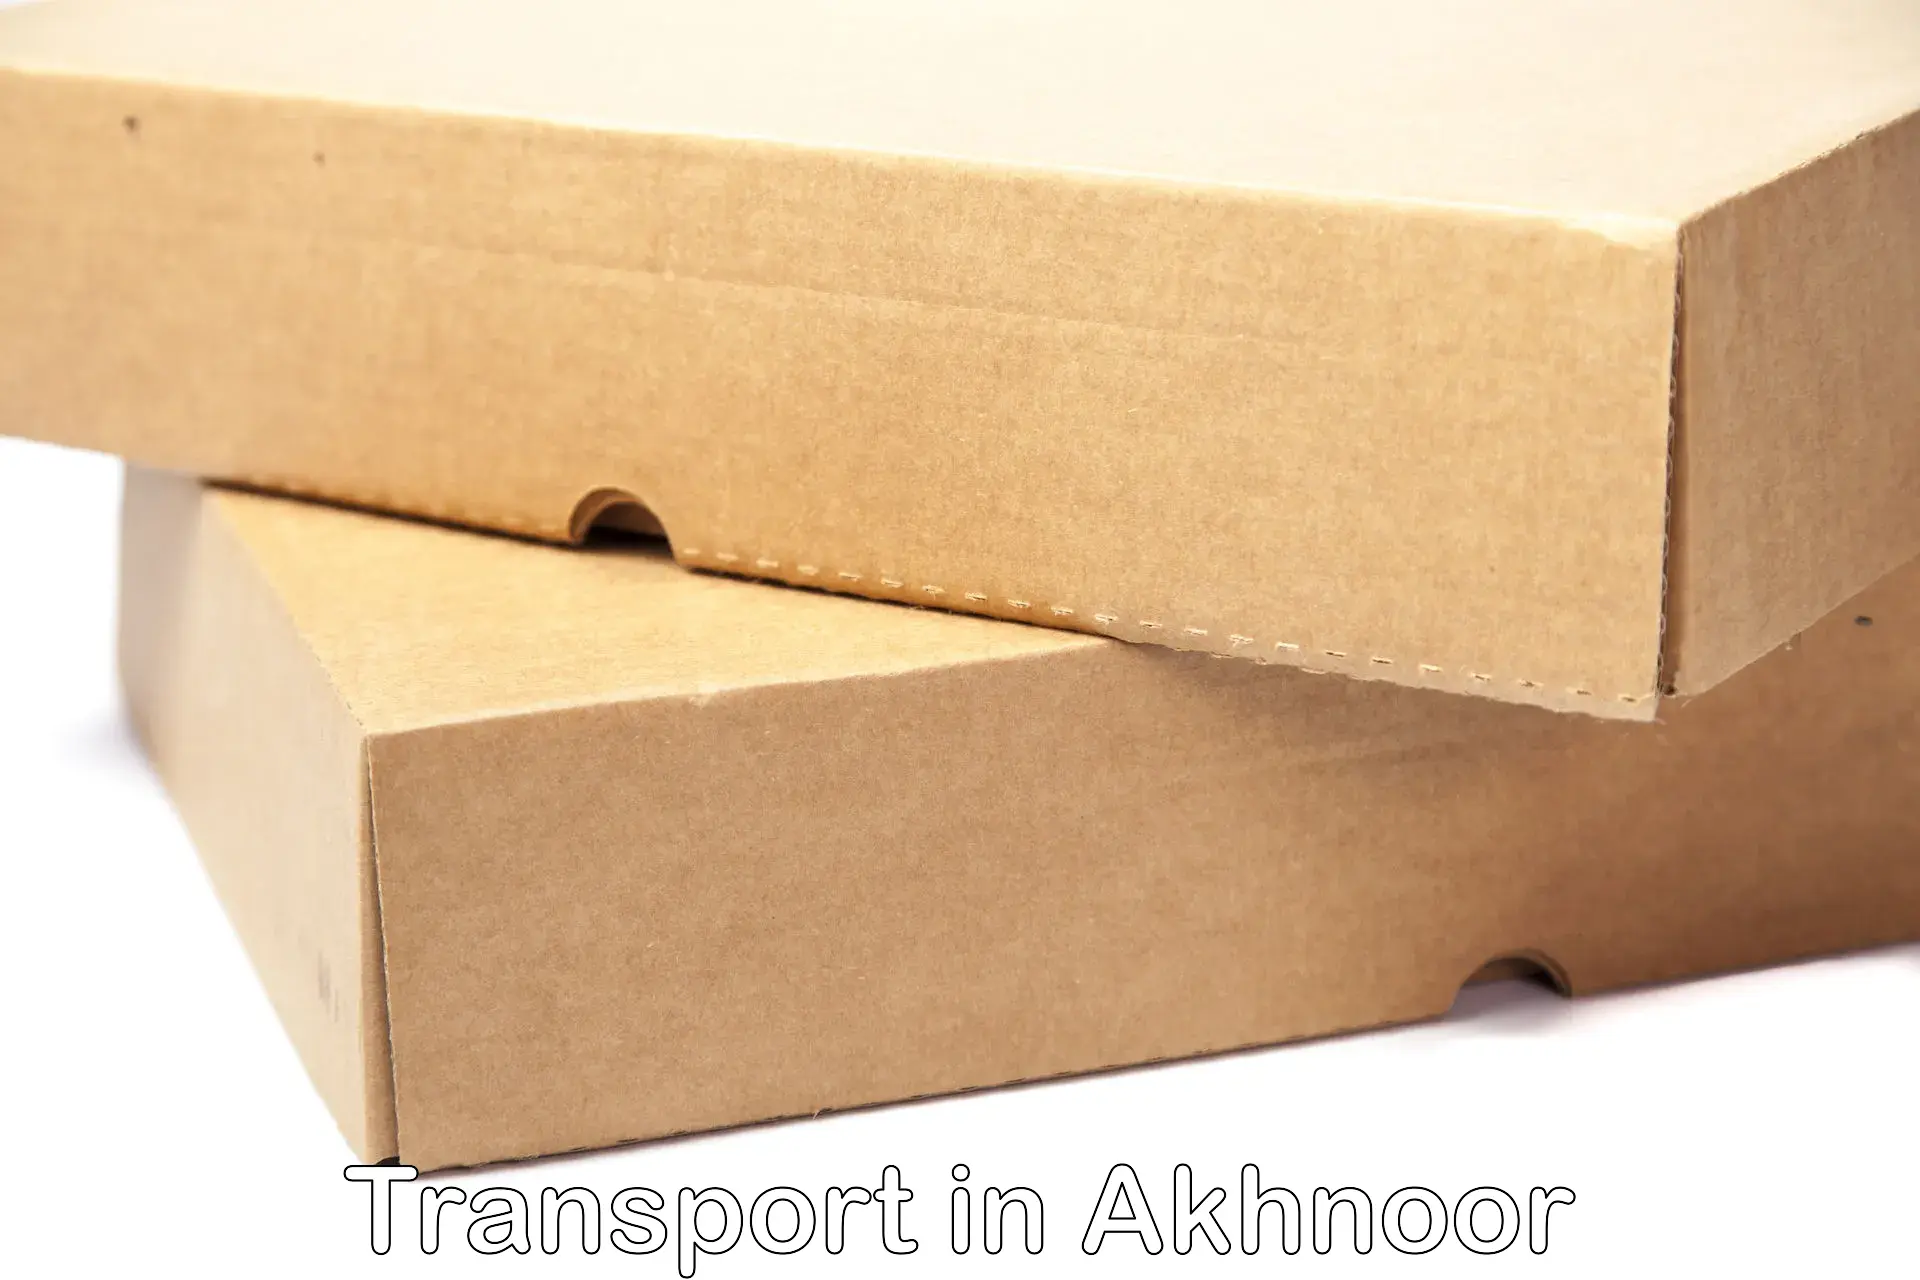 Transport shared services in Akhnoor